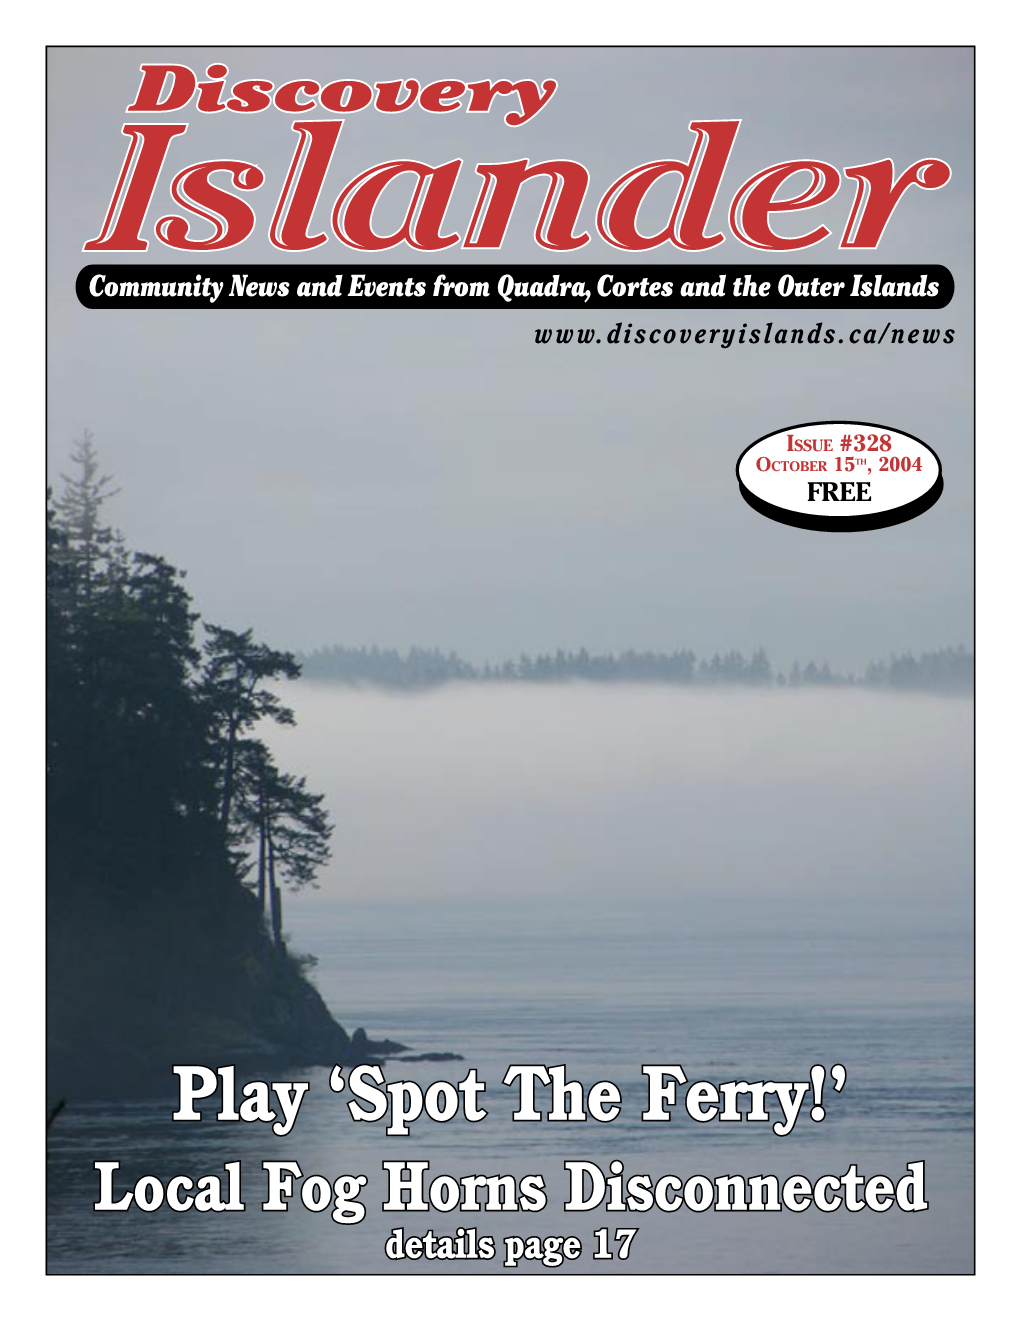 Spot the Ferry!’ Local Fog Horns Disconnected Details Page 17 REGIONAL DISTRICT N O T I C E O F Public Hearing Comox-Strathcona